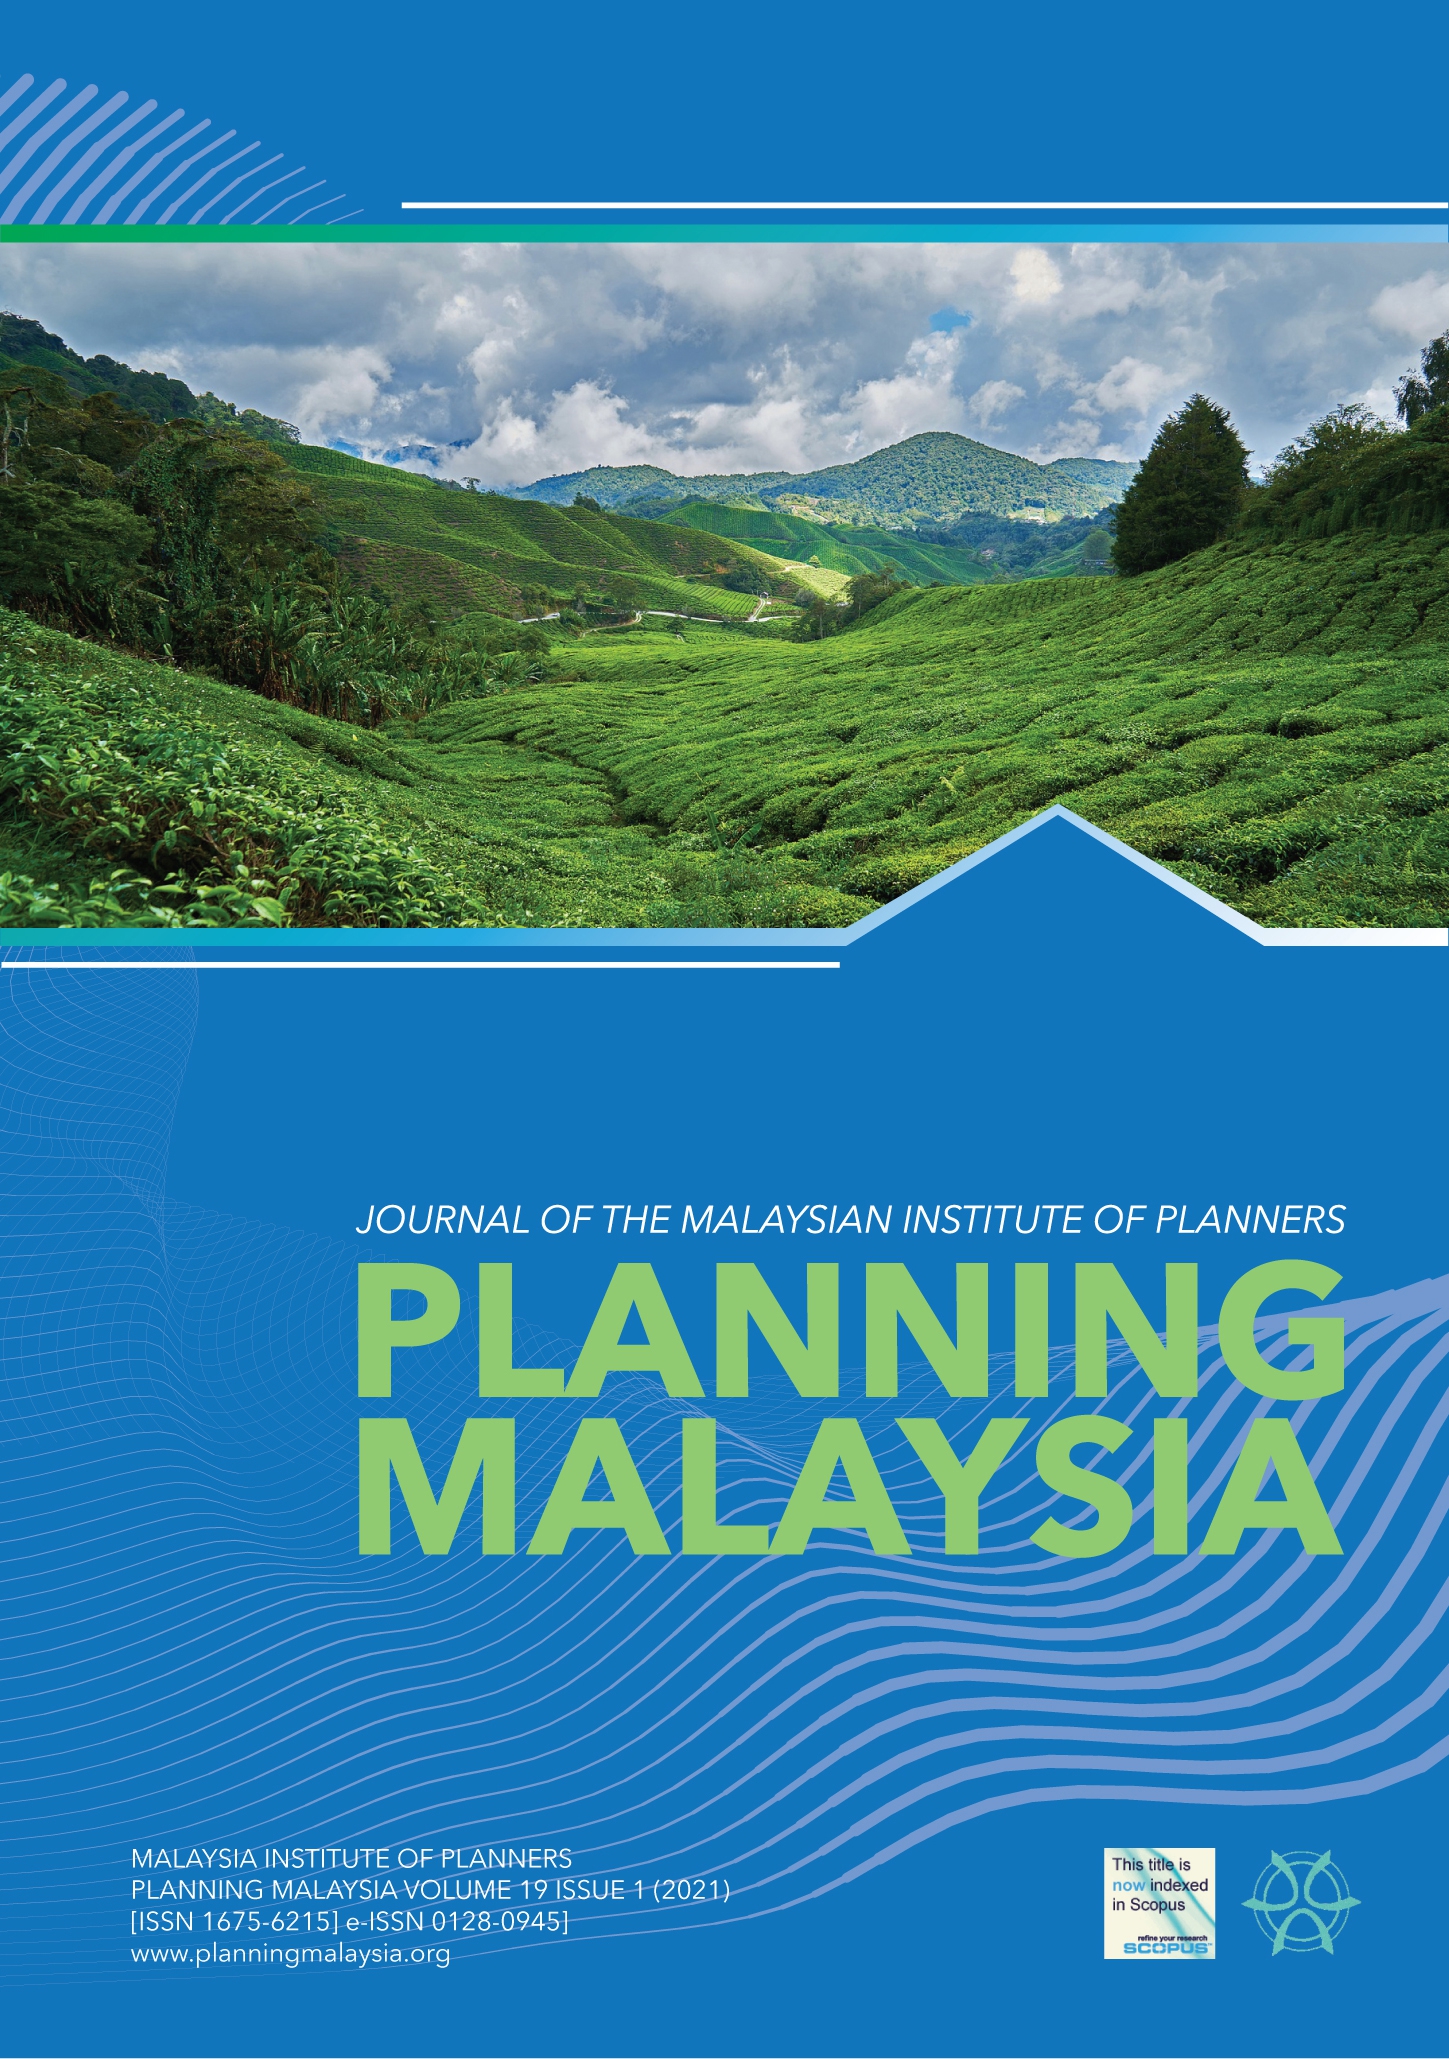 					View Vol. 19 (2021): PLANNING MALAYSIA JOURNAL : Volume 19, Issue 1, 2021
				